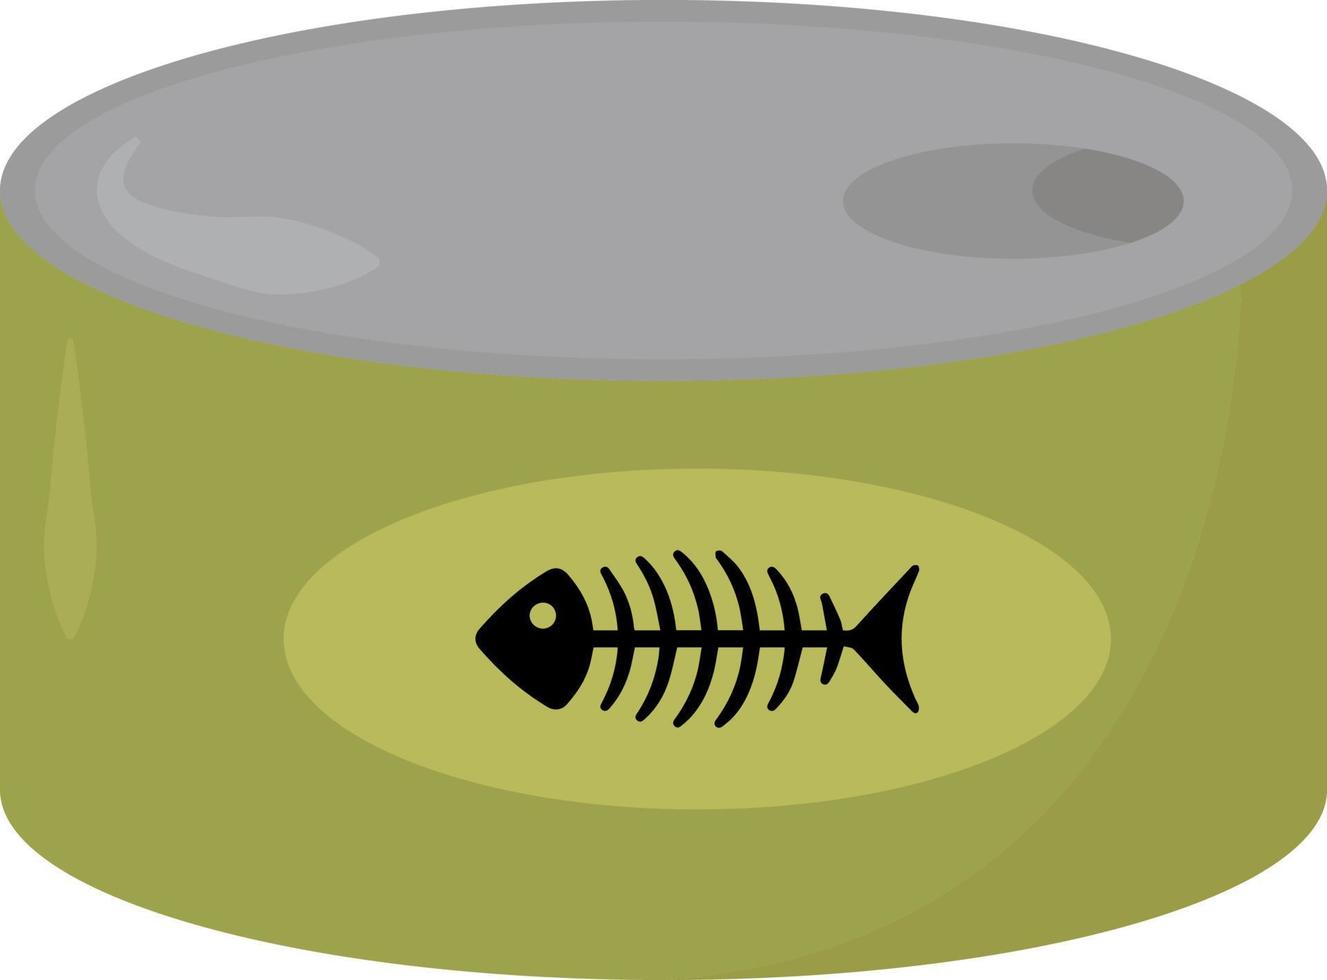 Fish can, illustration, vector on white background